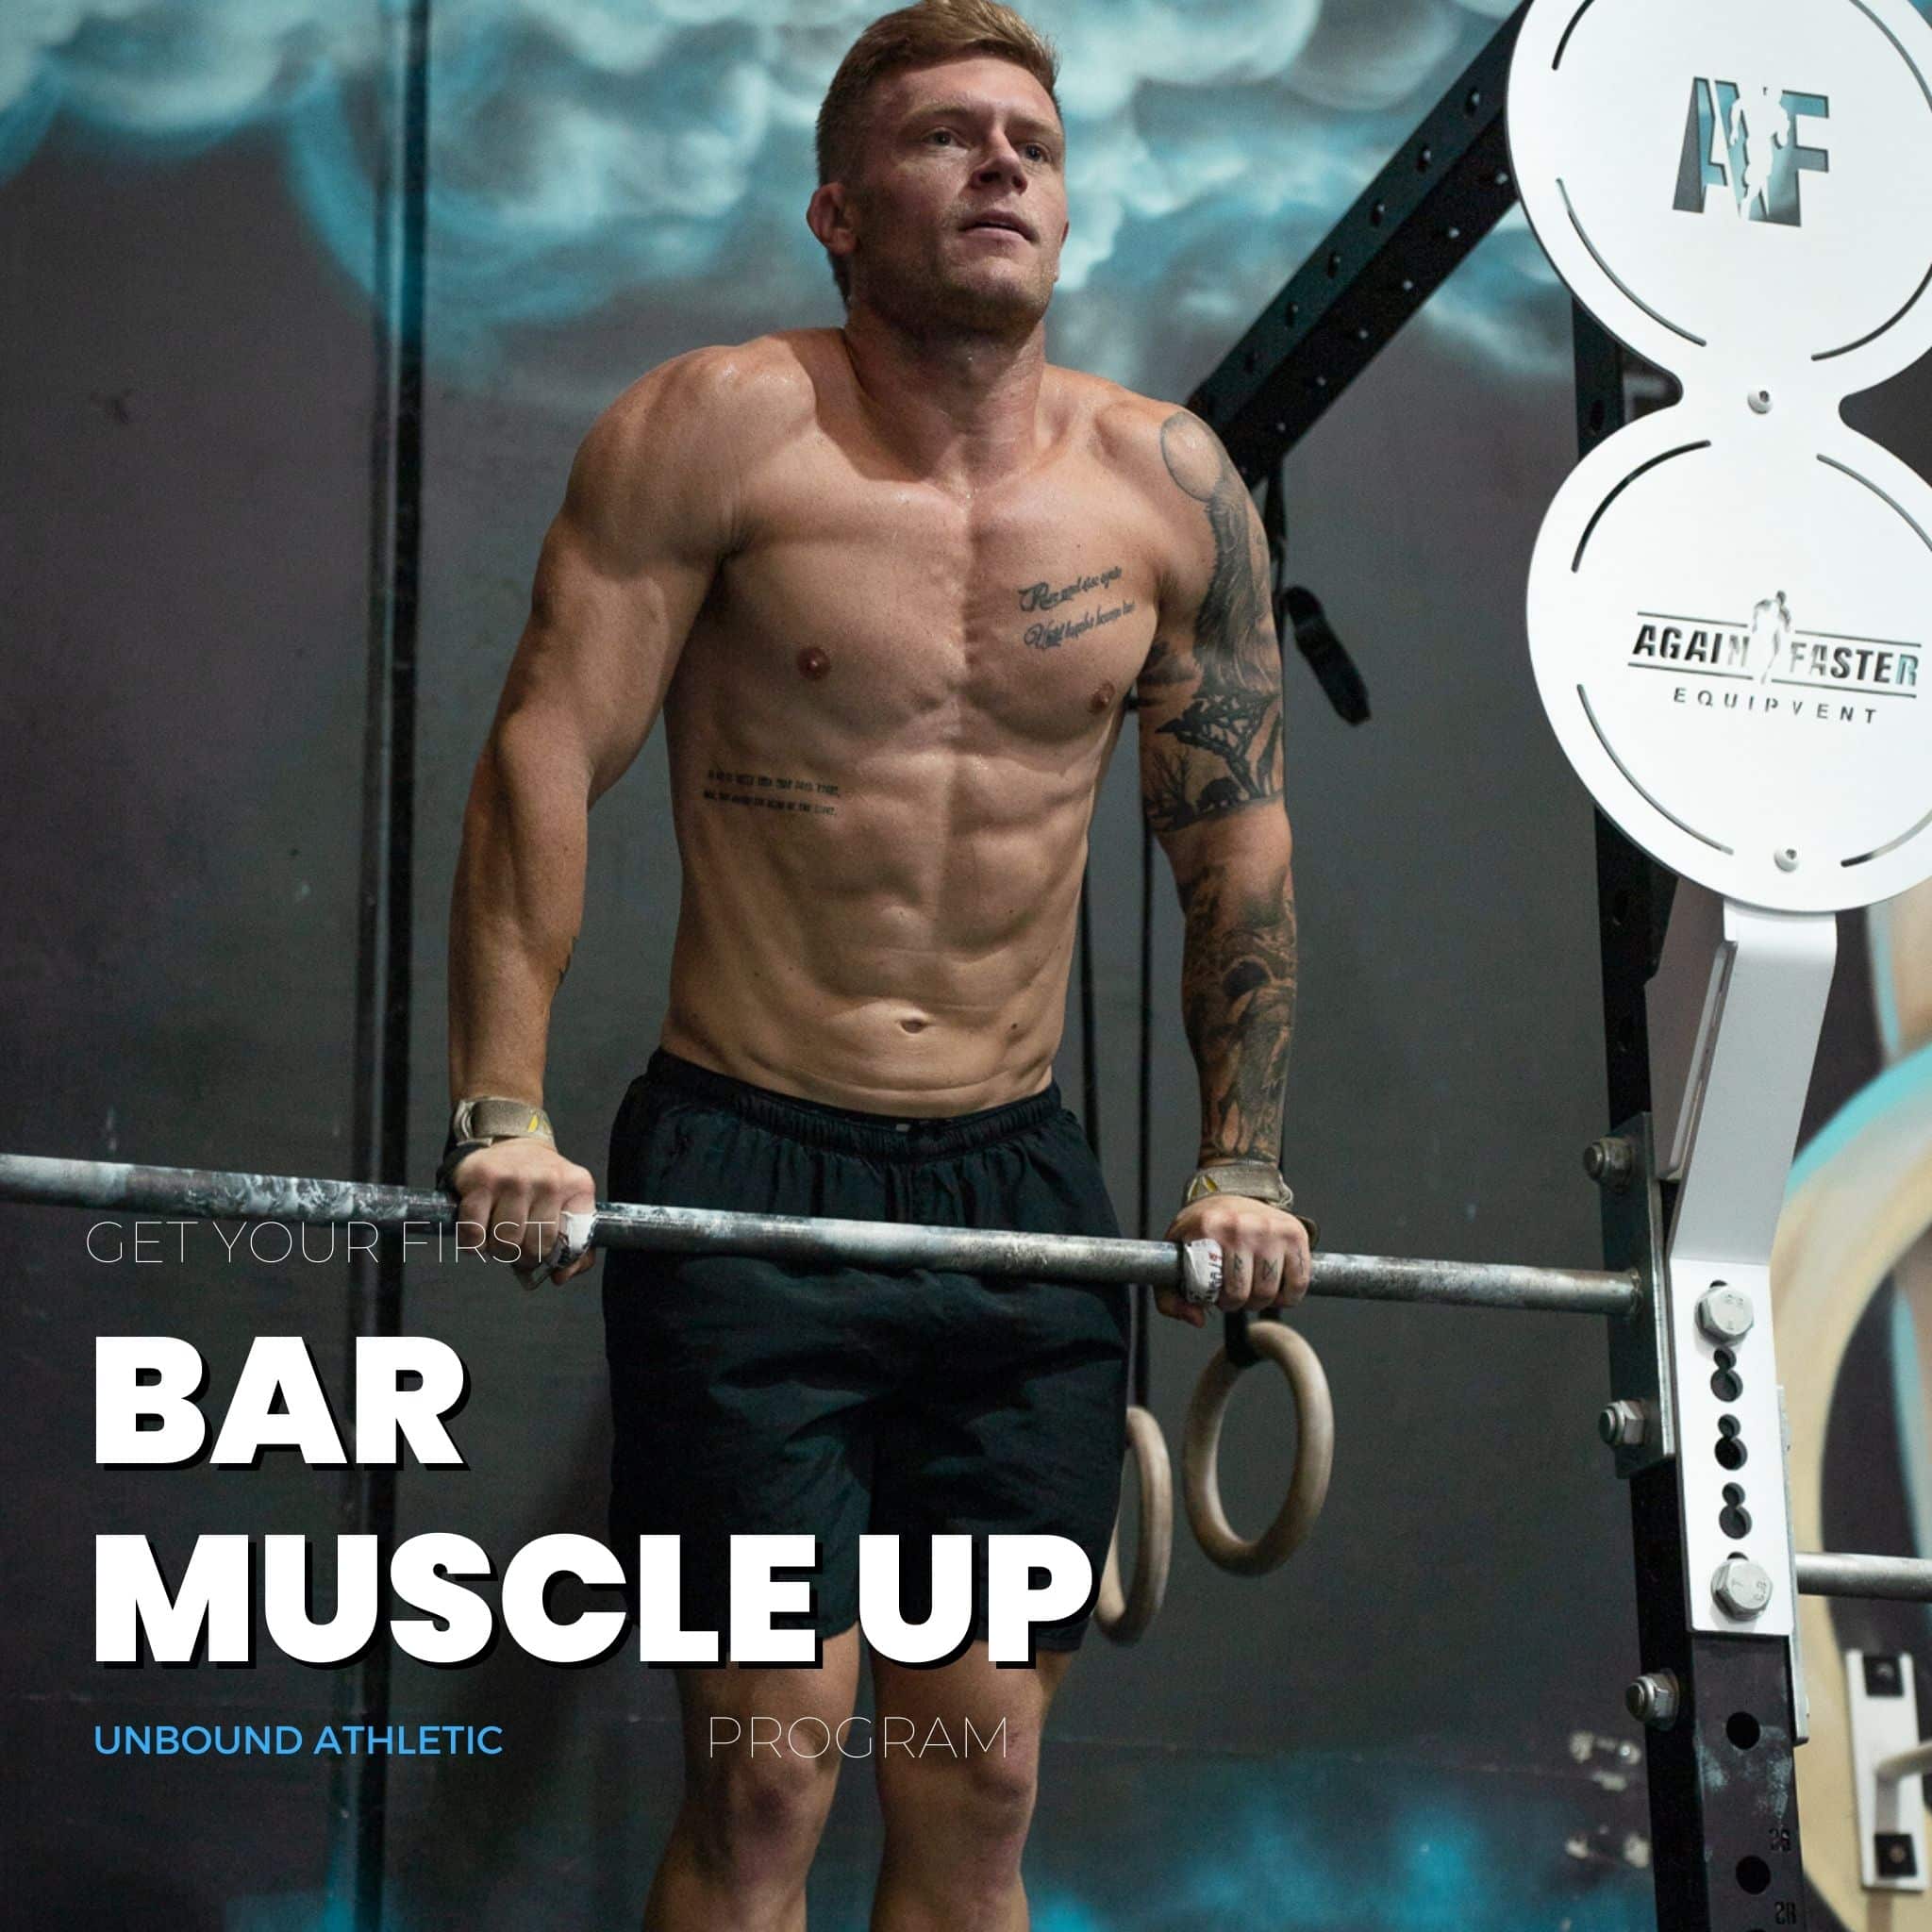 Read more about the article Get Your First Bar Muscle Up! Here Is What You Should Know.